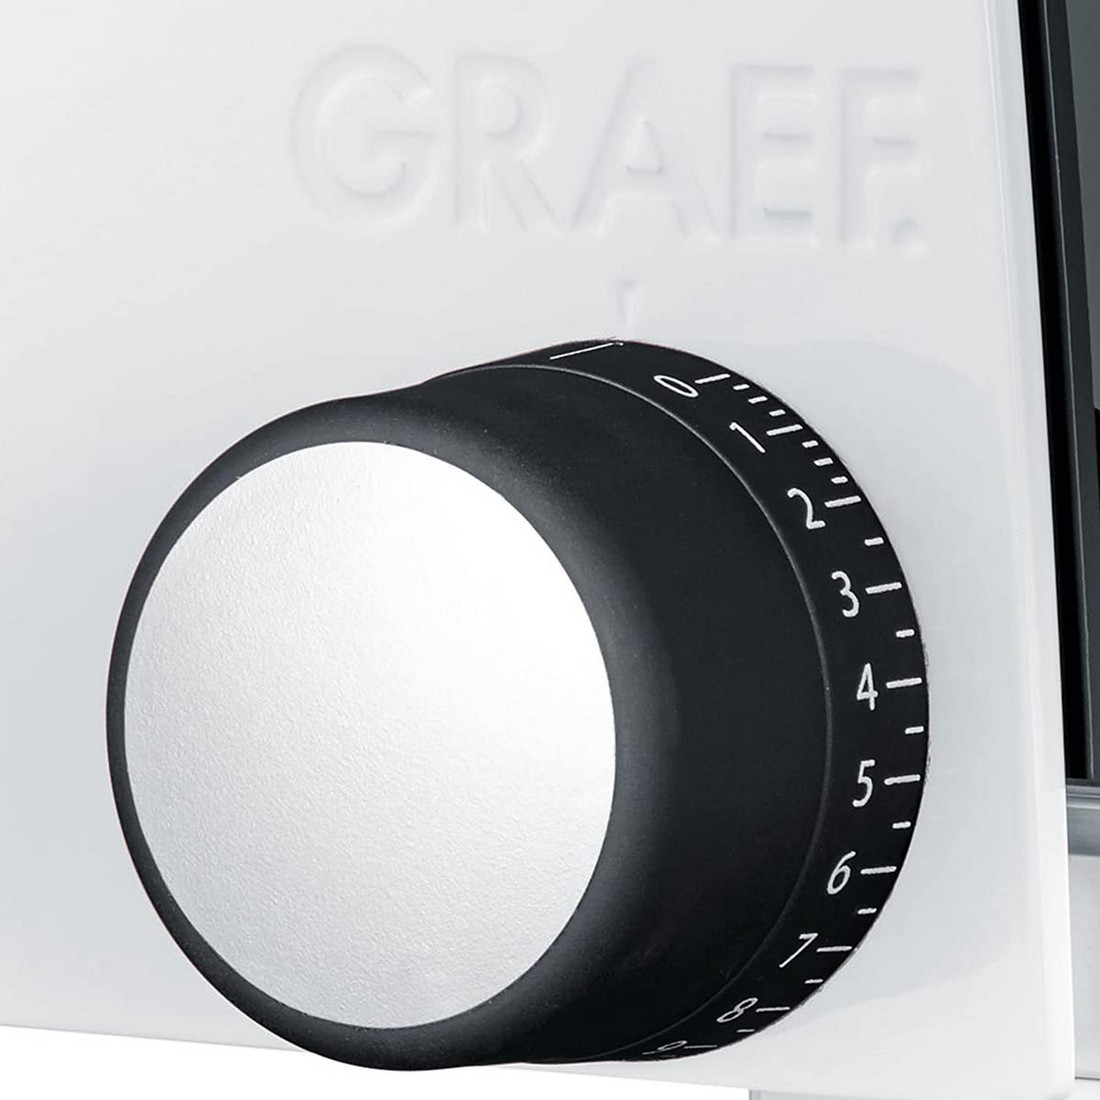 Graef - Manual slicer with serrated blade and built-in base - SKS 110 Graef  Slicers Products